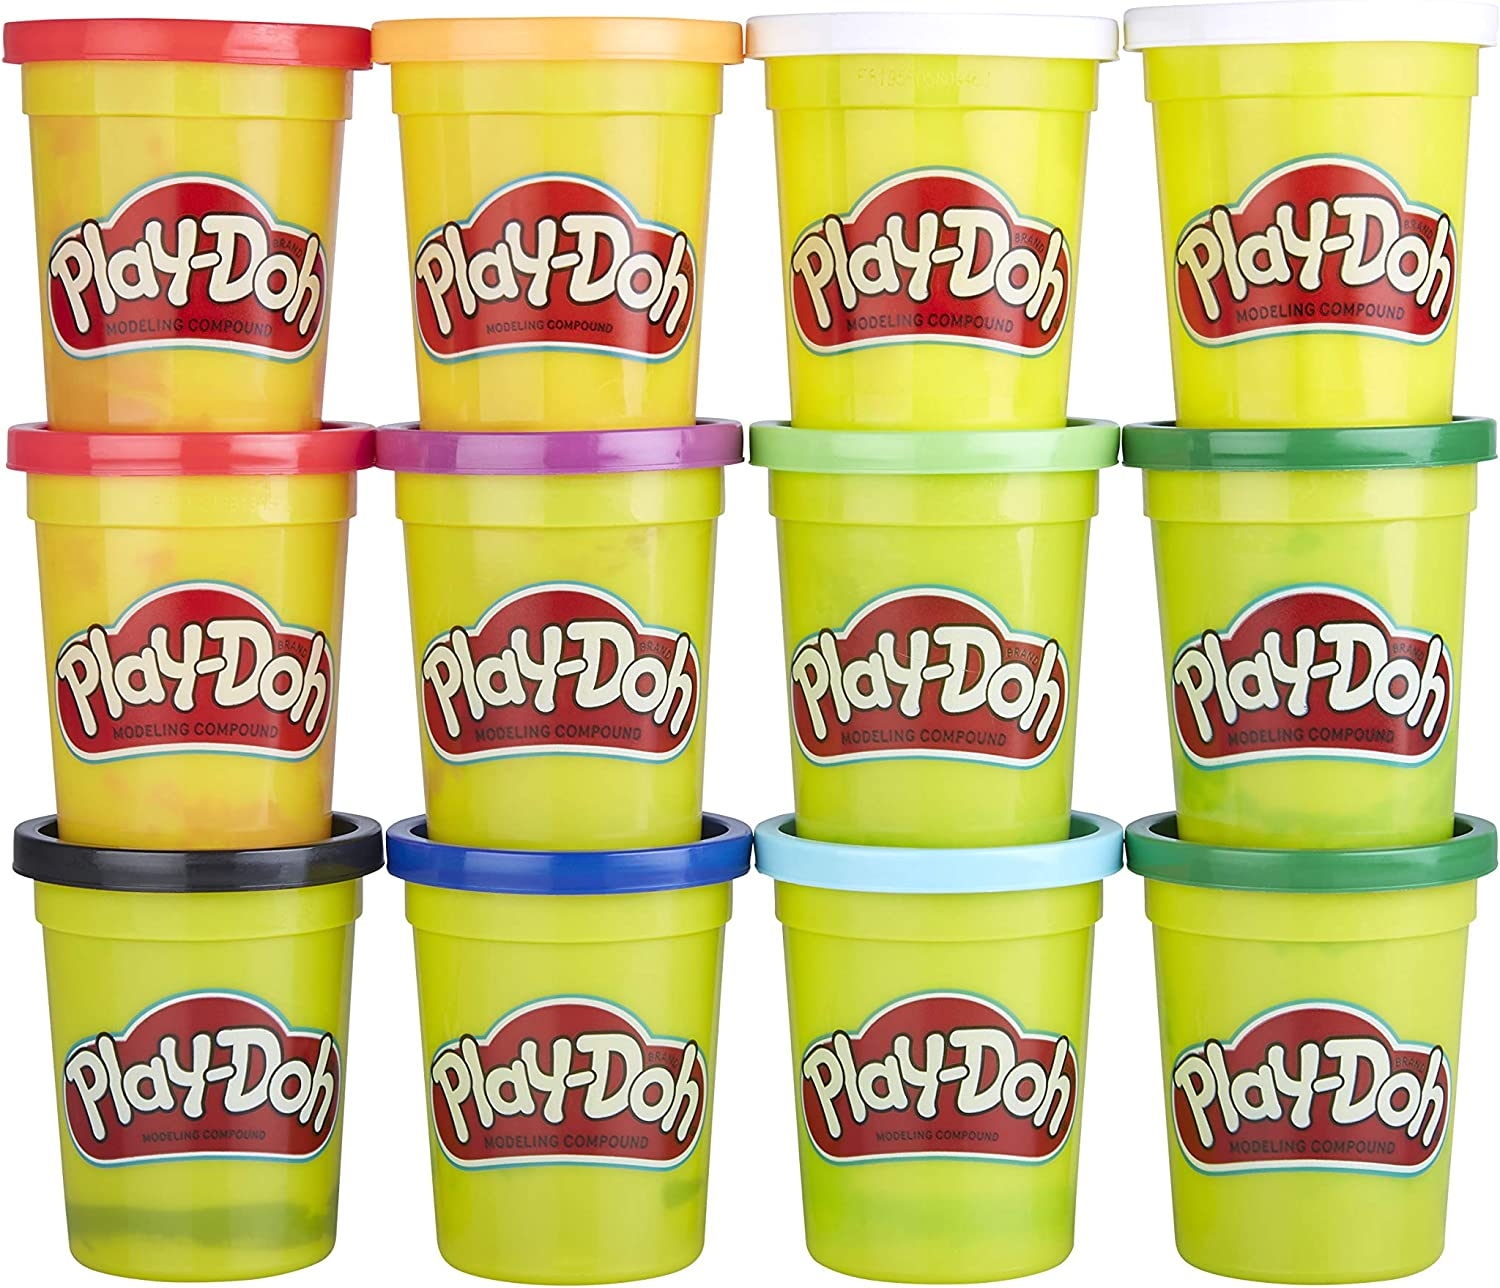 Play-Doh Bulk Winter Colors 12-Pack of Non-Toxic Modeling Compound, 4-Ounce Cans Import To Shop ×Product customization General